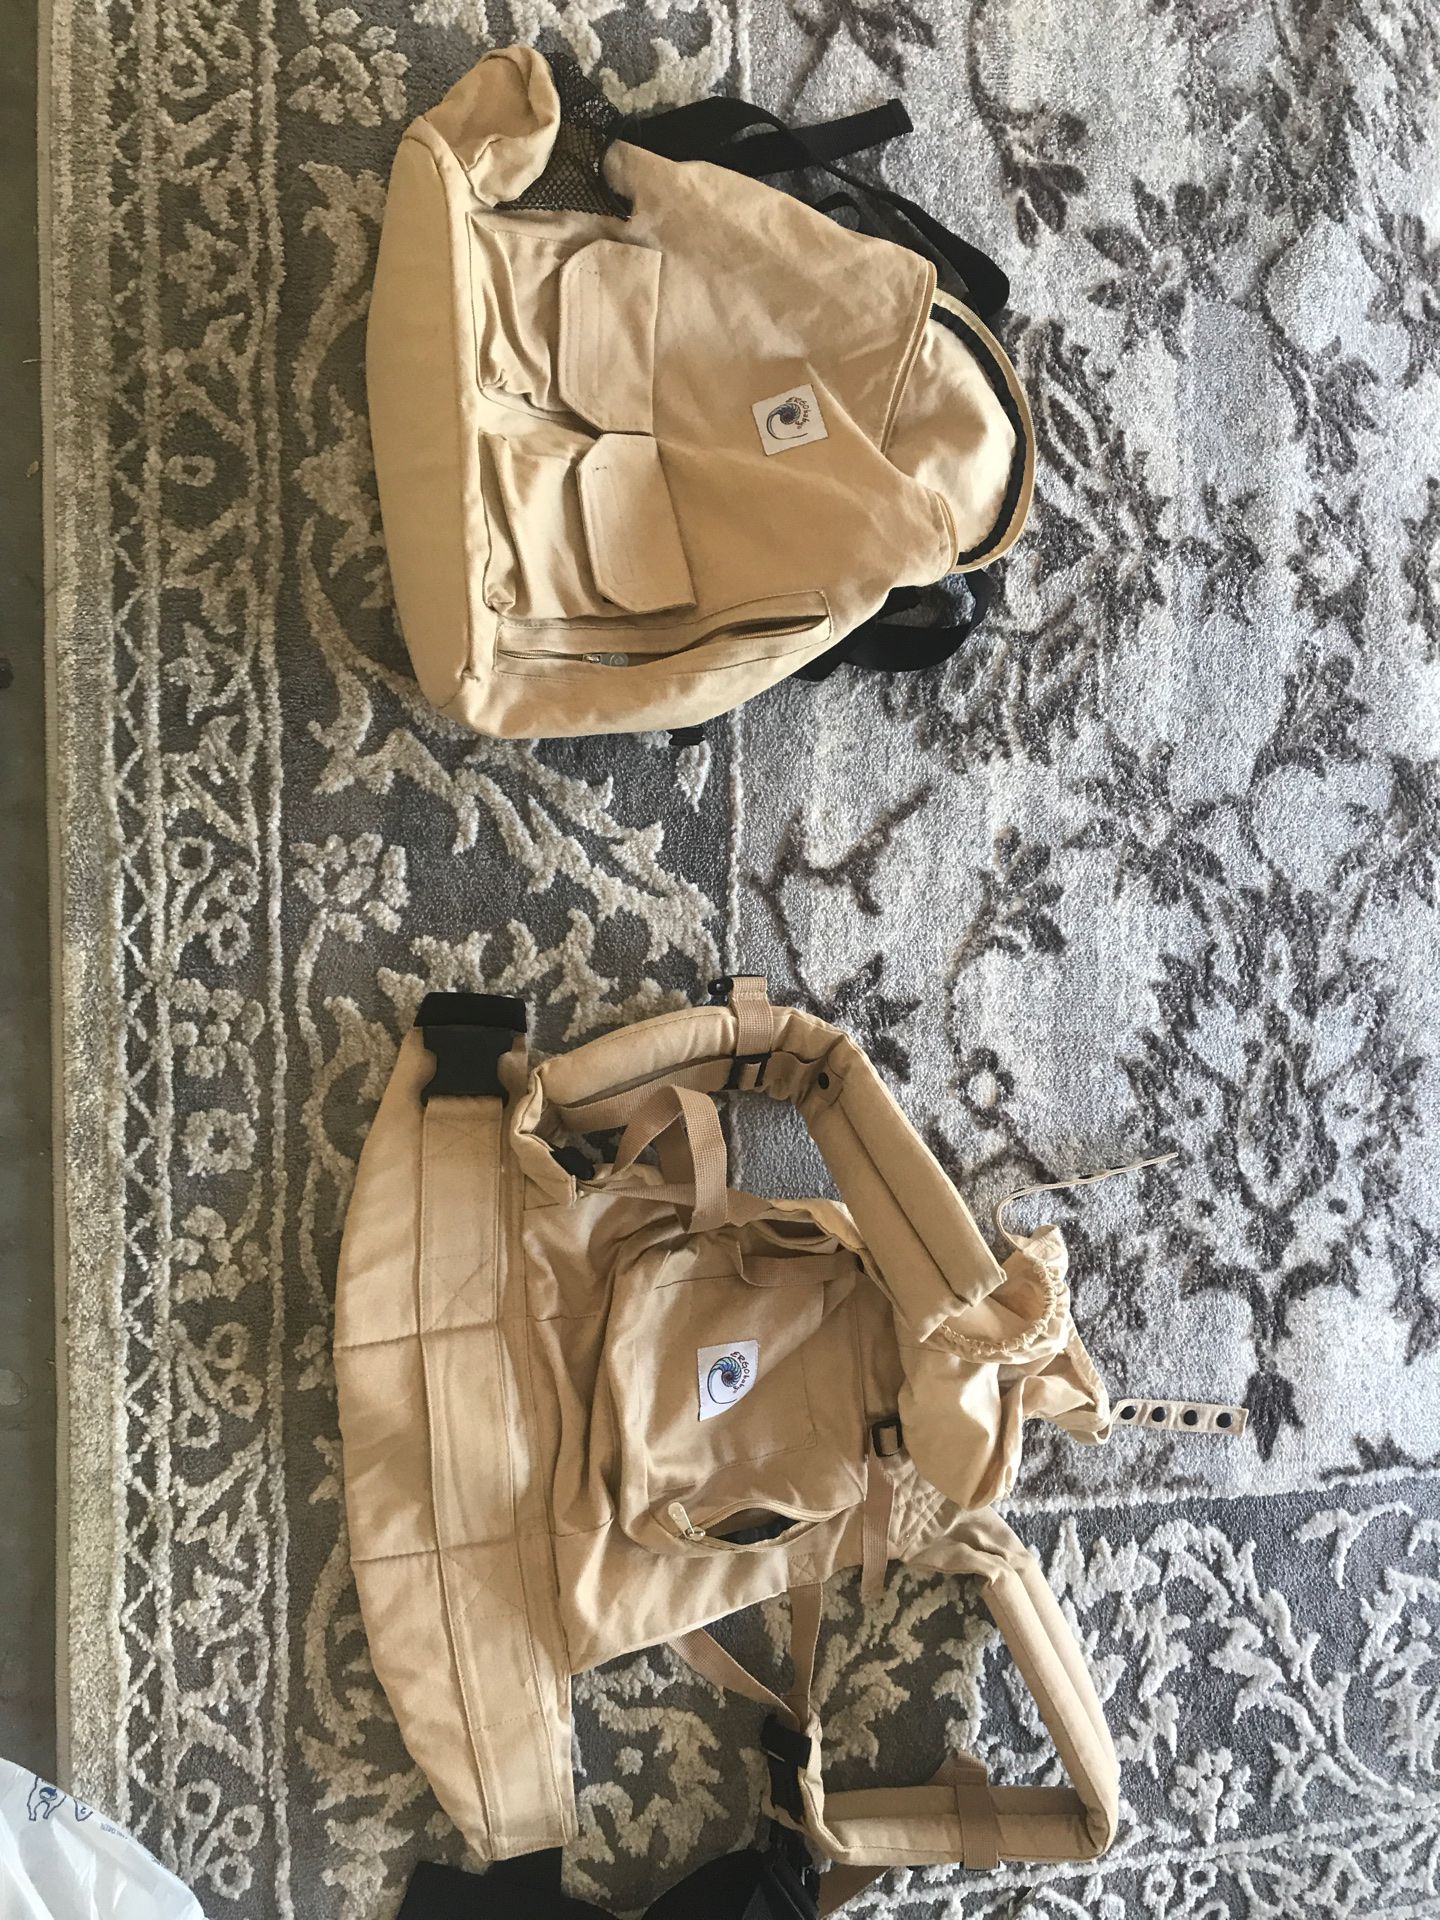 Amazing condition ergo baby carrier and matching khaki ergo baby backpack diaper bag